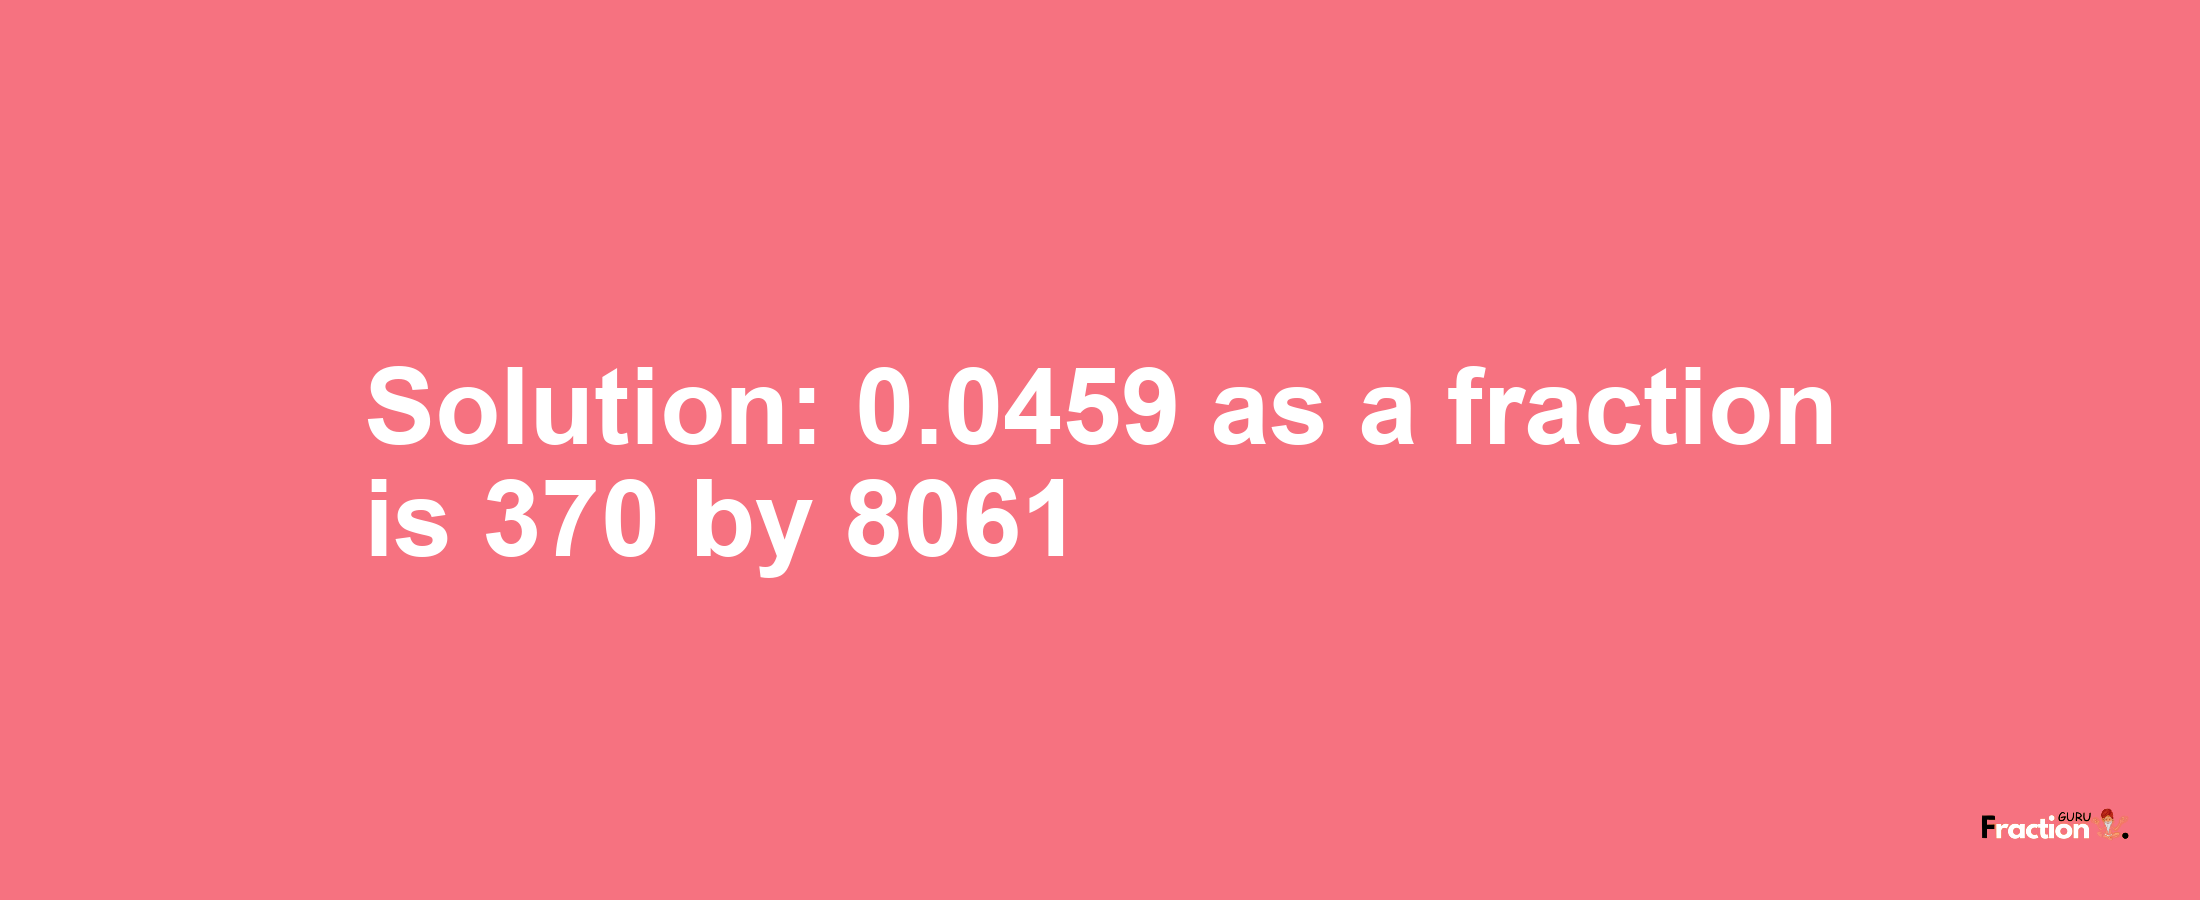 Solution:0.0459 as a fraction is 370/8061